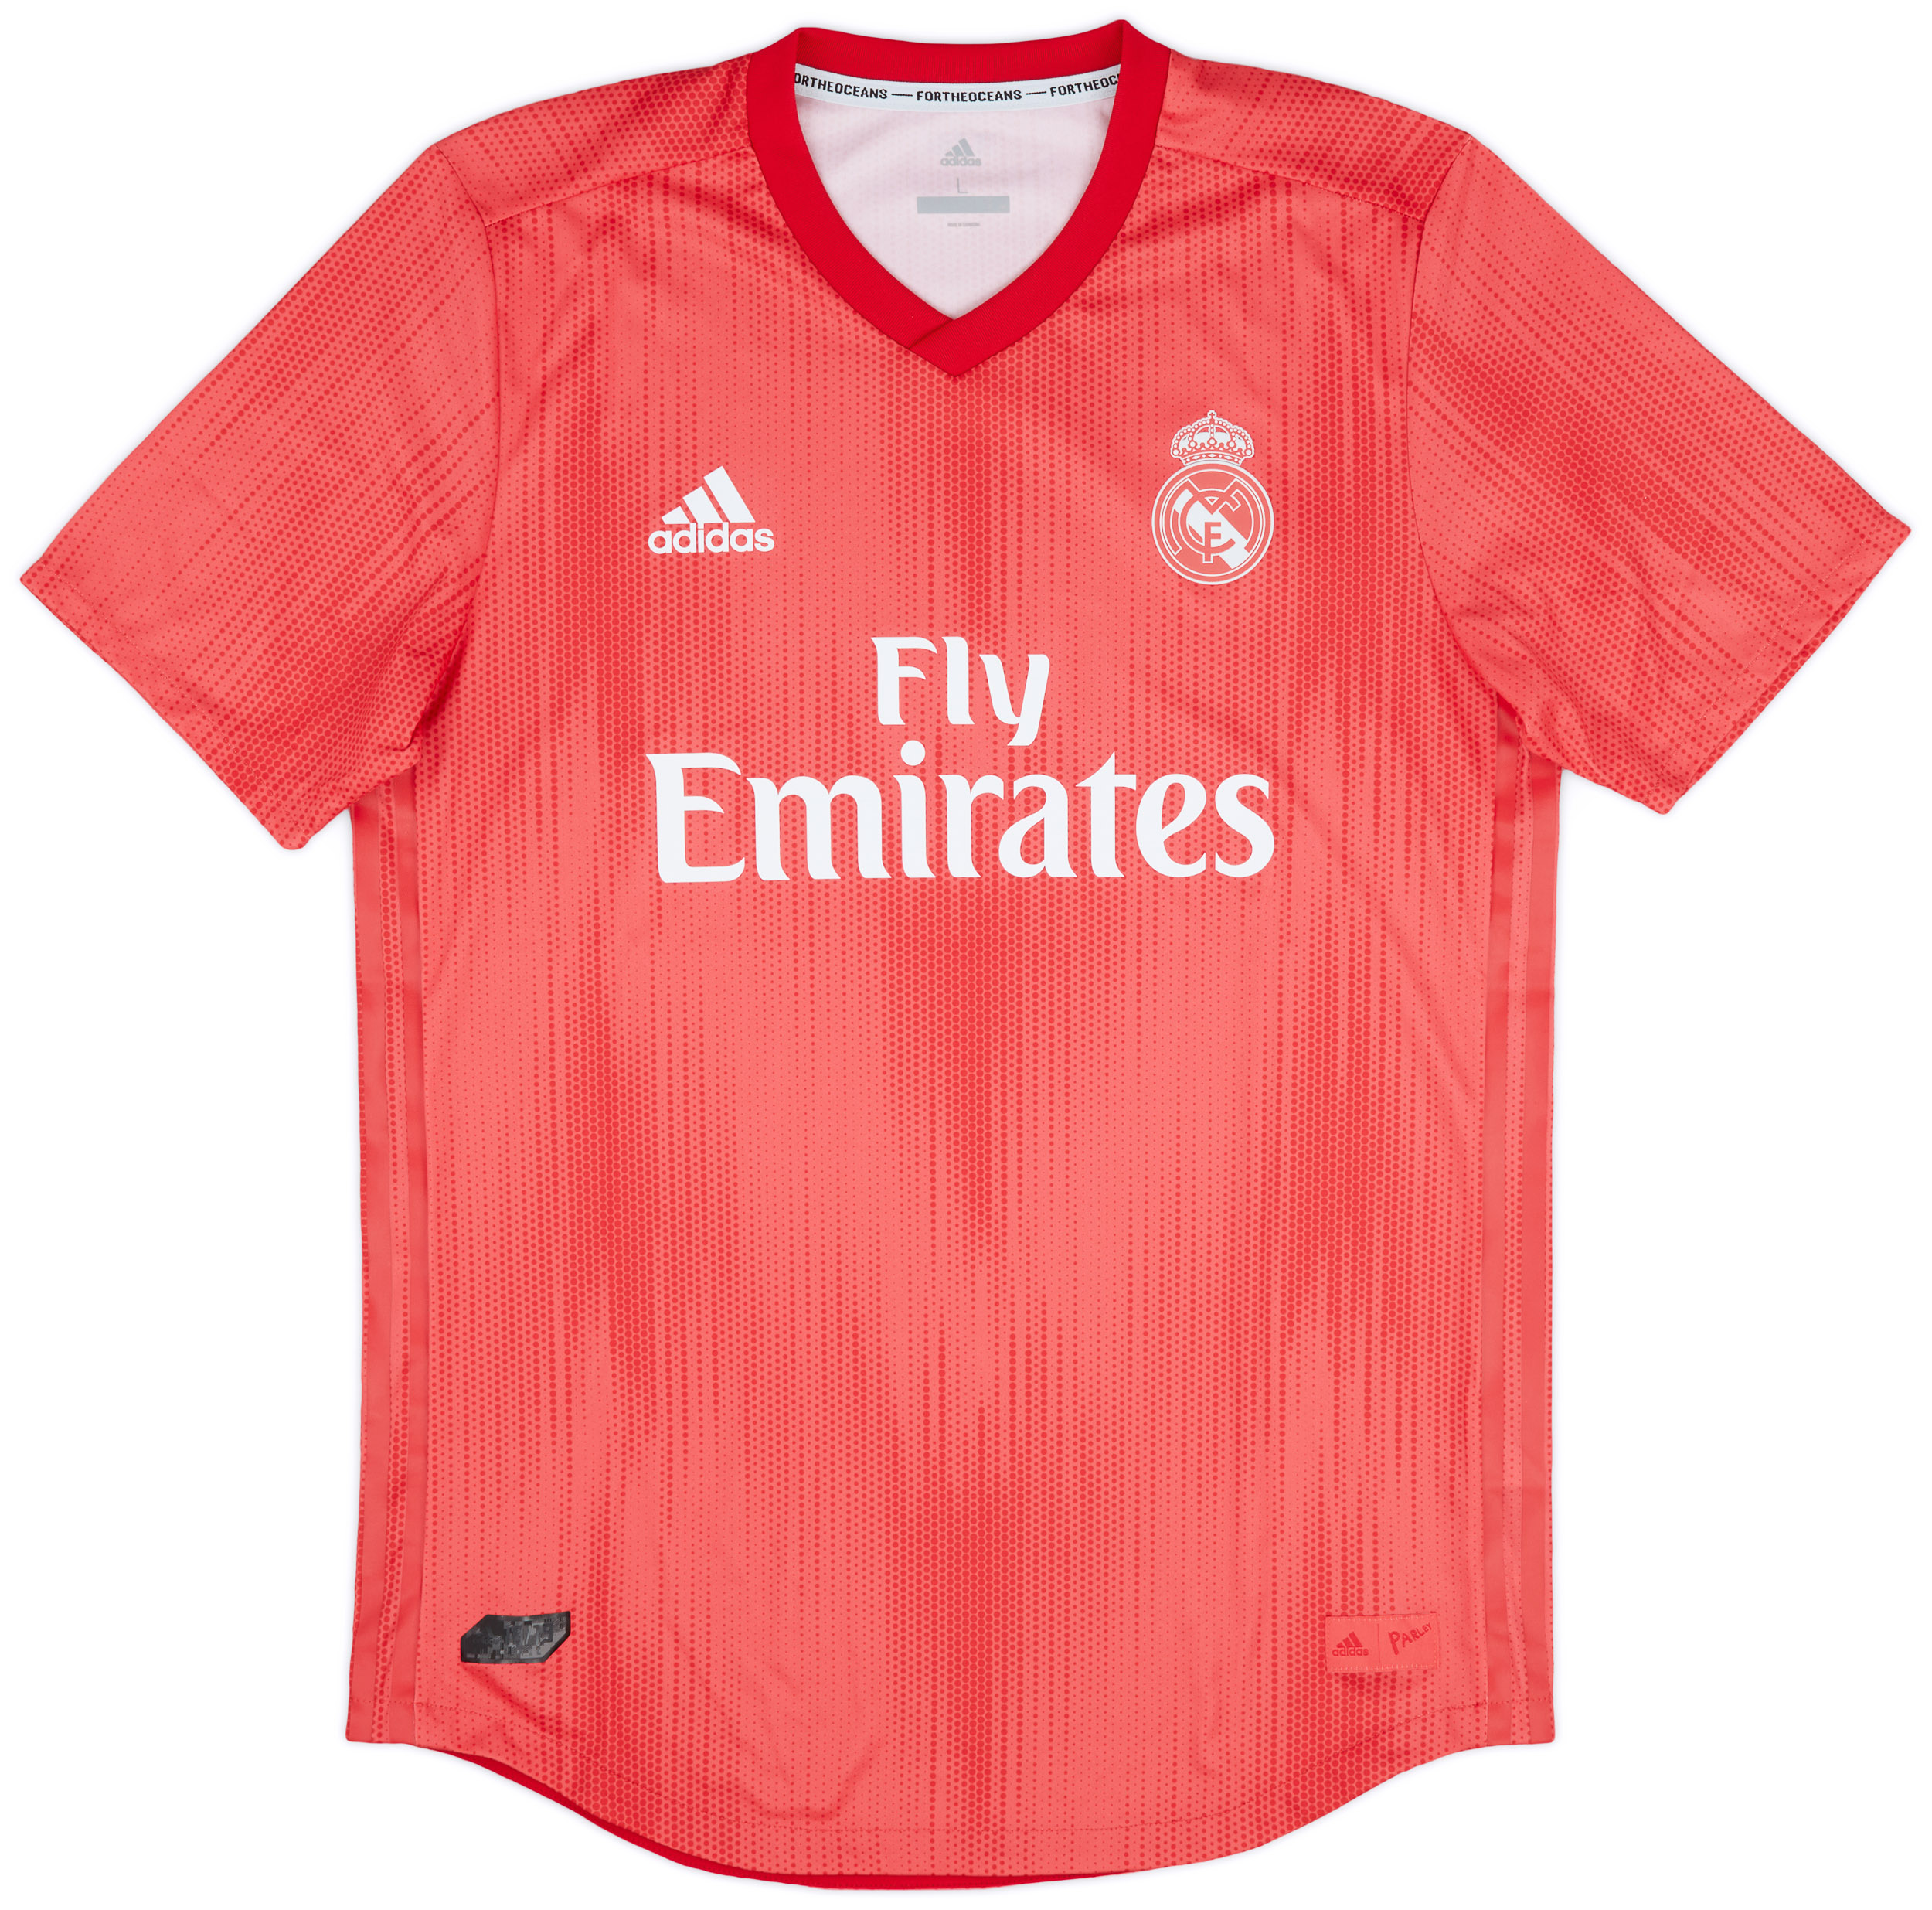 2018-19 Real Madrid Authentic Third Shirt - 10/10 - ()